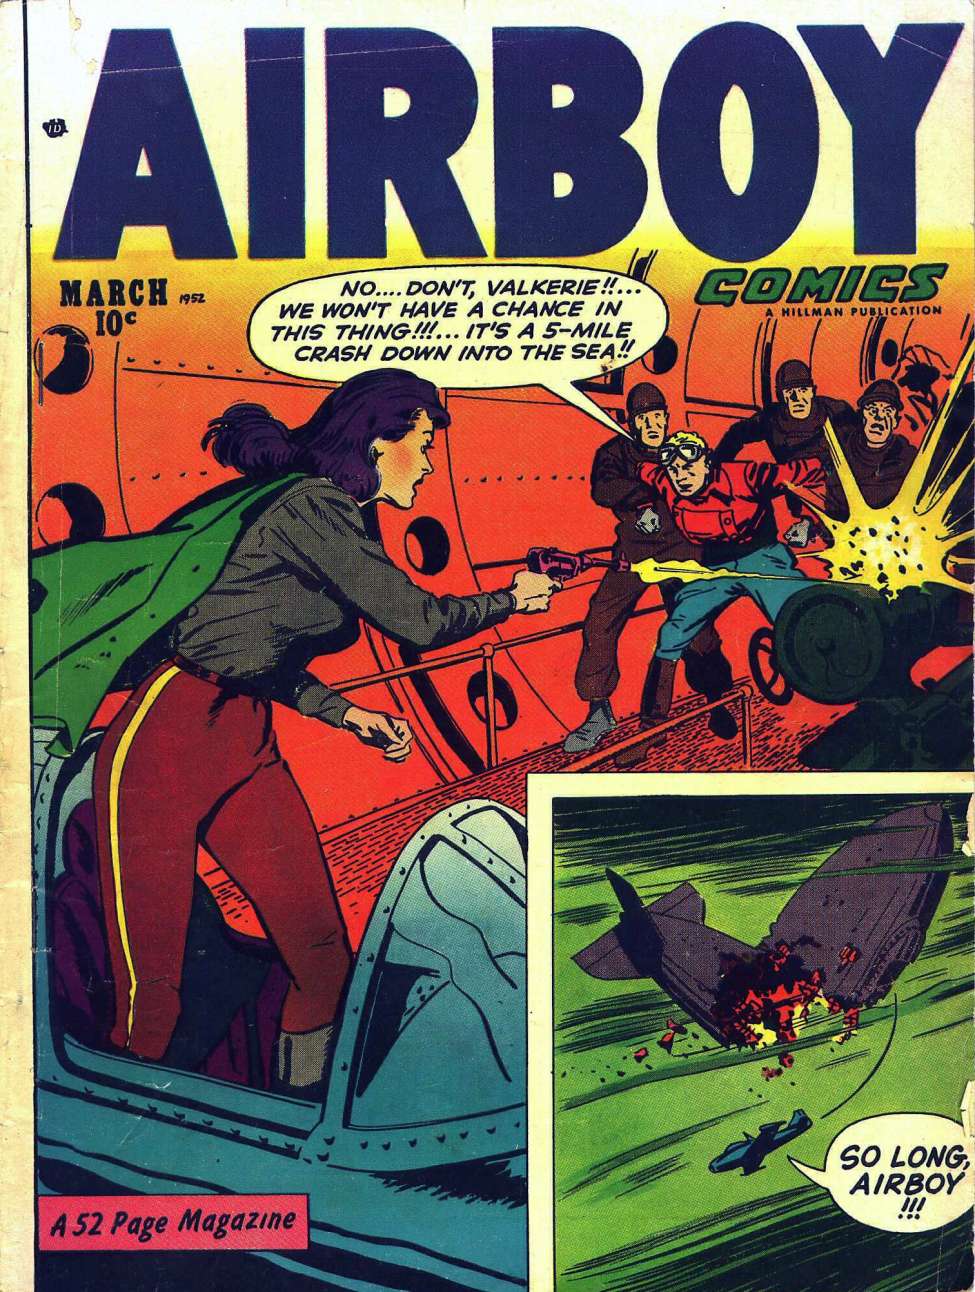 Book Cover For Airboy Comics v9 2